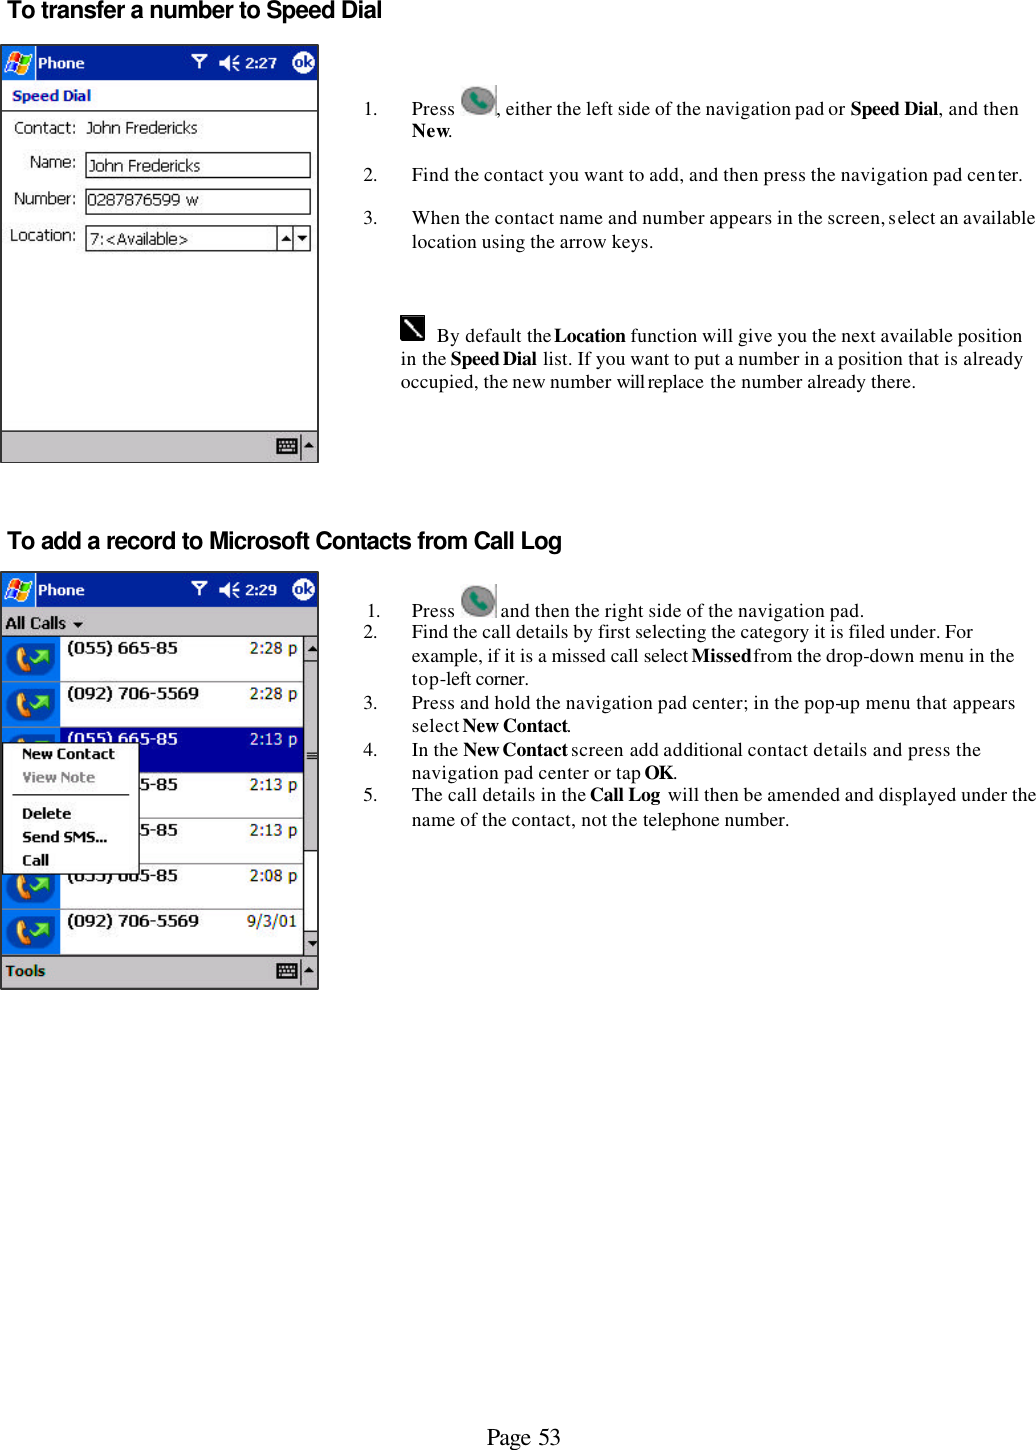 Page 53 To transfer a number to Speed Dial      1. Press  , either the left side of the navigation pad or Speed Dial, and then New. 2. Find the contact you want to add, and then press the navigation pad center.  3. When the contact name and number appears in the screen, select an available location using the arrow keys.    By default the Location function will give you the next available position in the Speed Dial list. If you want to put a number in a position that is already occupied, the new number will replace the number already there. To add a record to Microsoft Contacts from Call Log    1. Press   and then the right side of the navigation pad. 2. Find the call details by first selecting the category it is filed under. For example, if it is a missed call select Missed from the drop-down menu in the top-left corner. 3. Press and hold the navigation pad center; in the pop-up menu that appears select New Contact.  4. In the New Contact screen add additional contact details and press the navigation pad center or tap OK. 5. The call details in the Call Log will then be amended and displayed under the name of the contact, not the telephone number.          